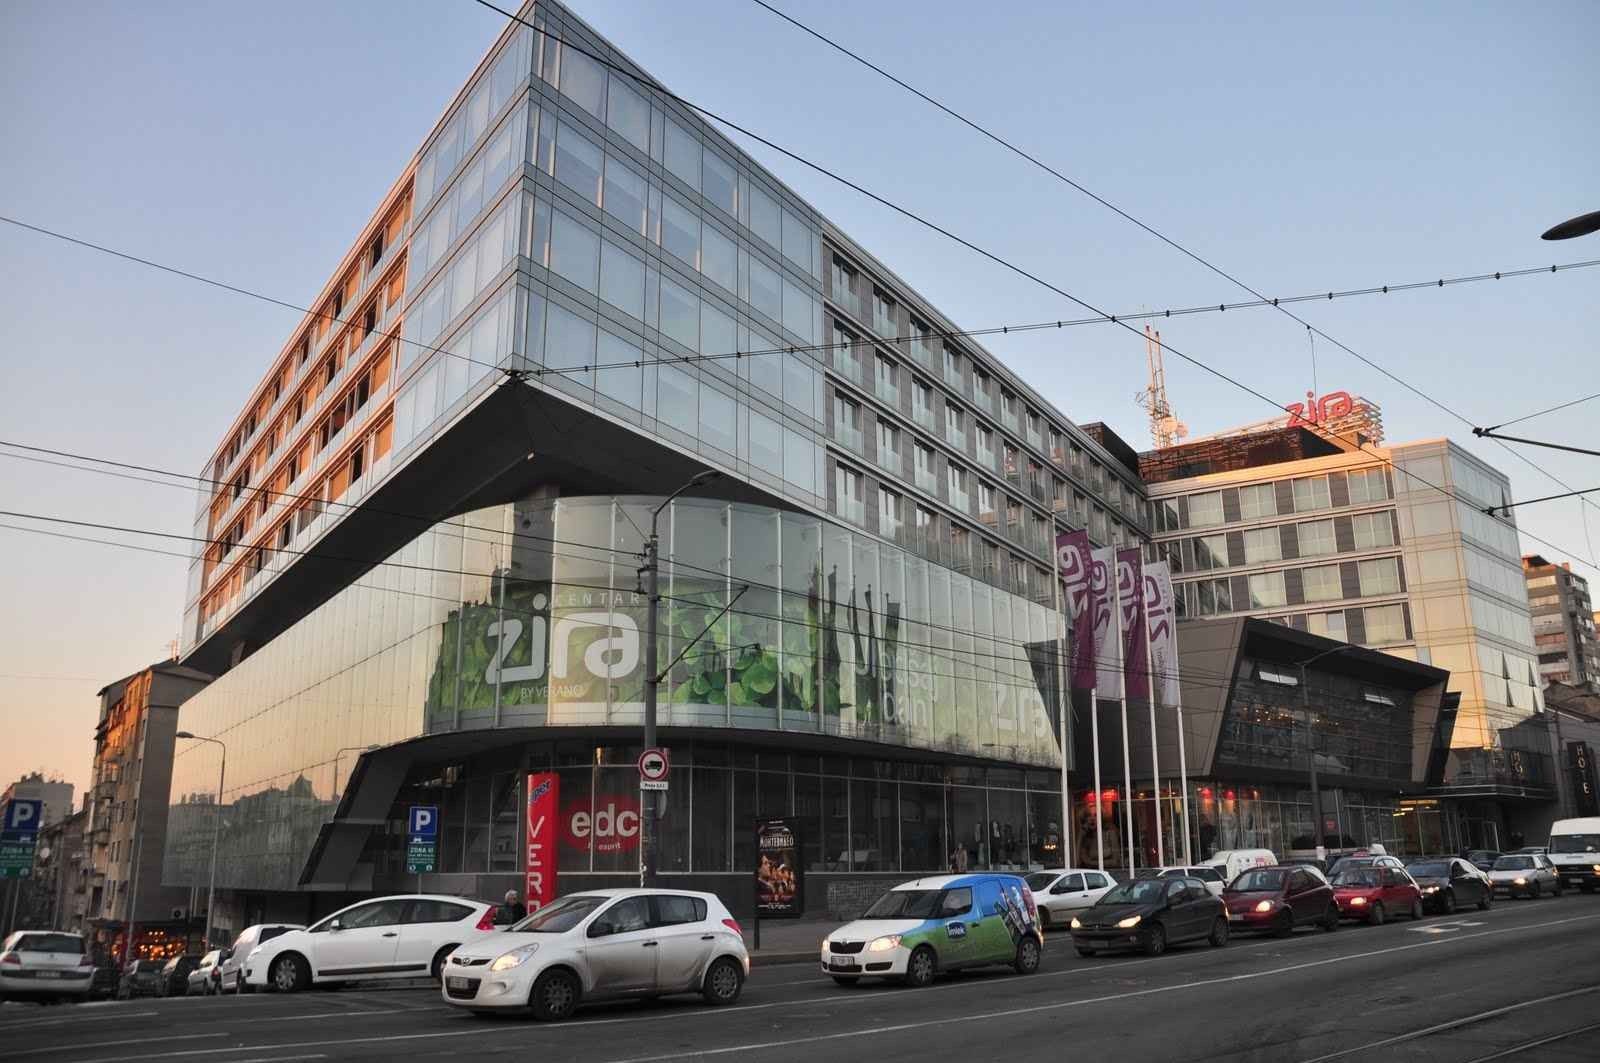 1581205289 116 Shopping in Belgrade .. 6 of the best and most - Shopping in Belgrade .. 6 of the best and most modern malls and markets in Serbia